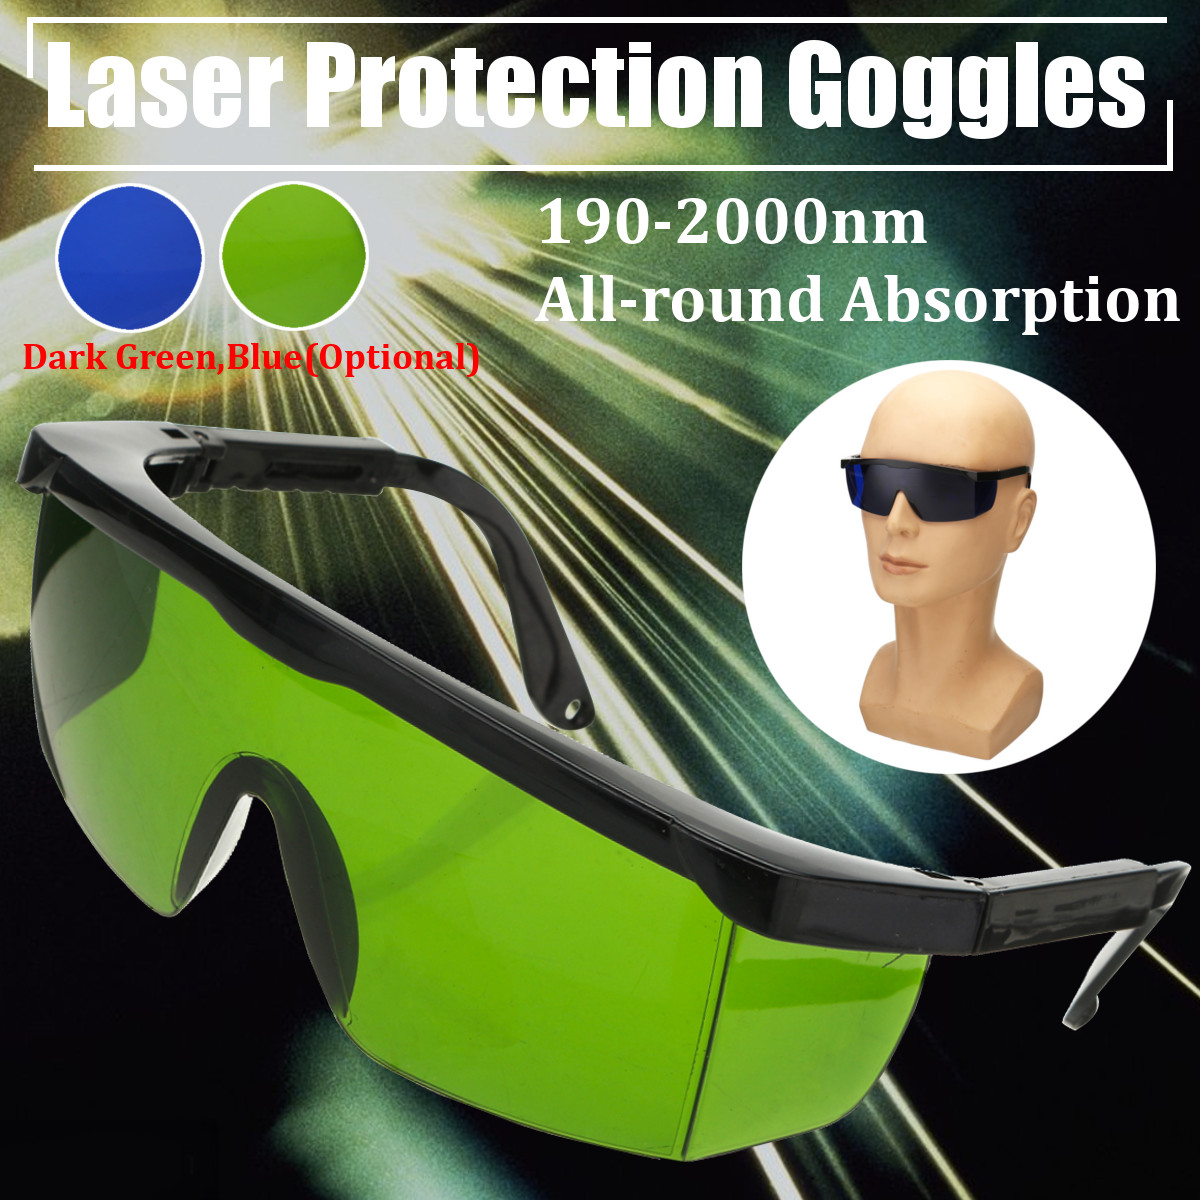 Pro-Laser-Protection-Goggles-Protective-Safety-Glasses-IPL-OD4D-190nm-2000nm-Laser-Goggles-1424199-1